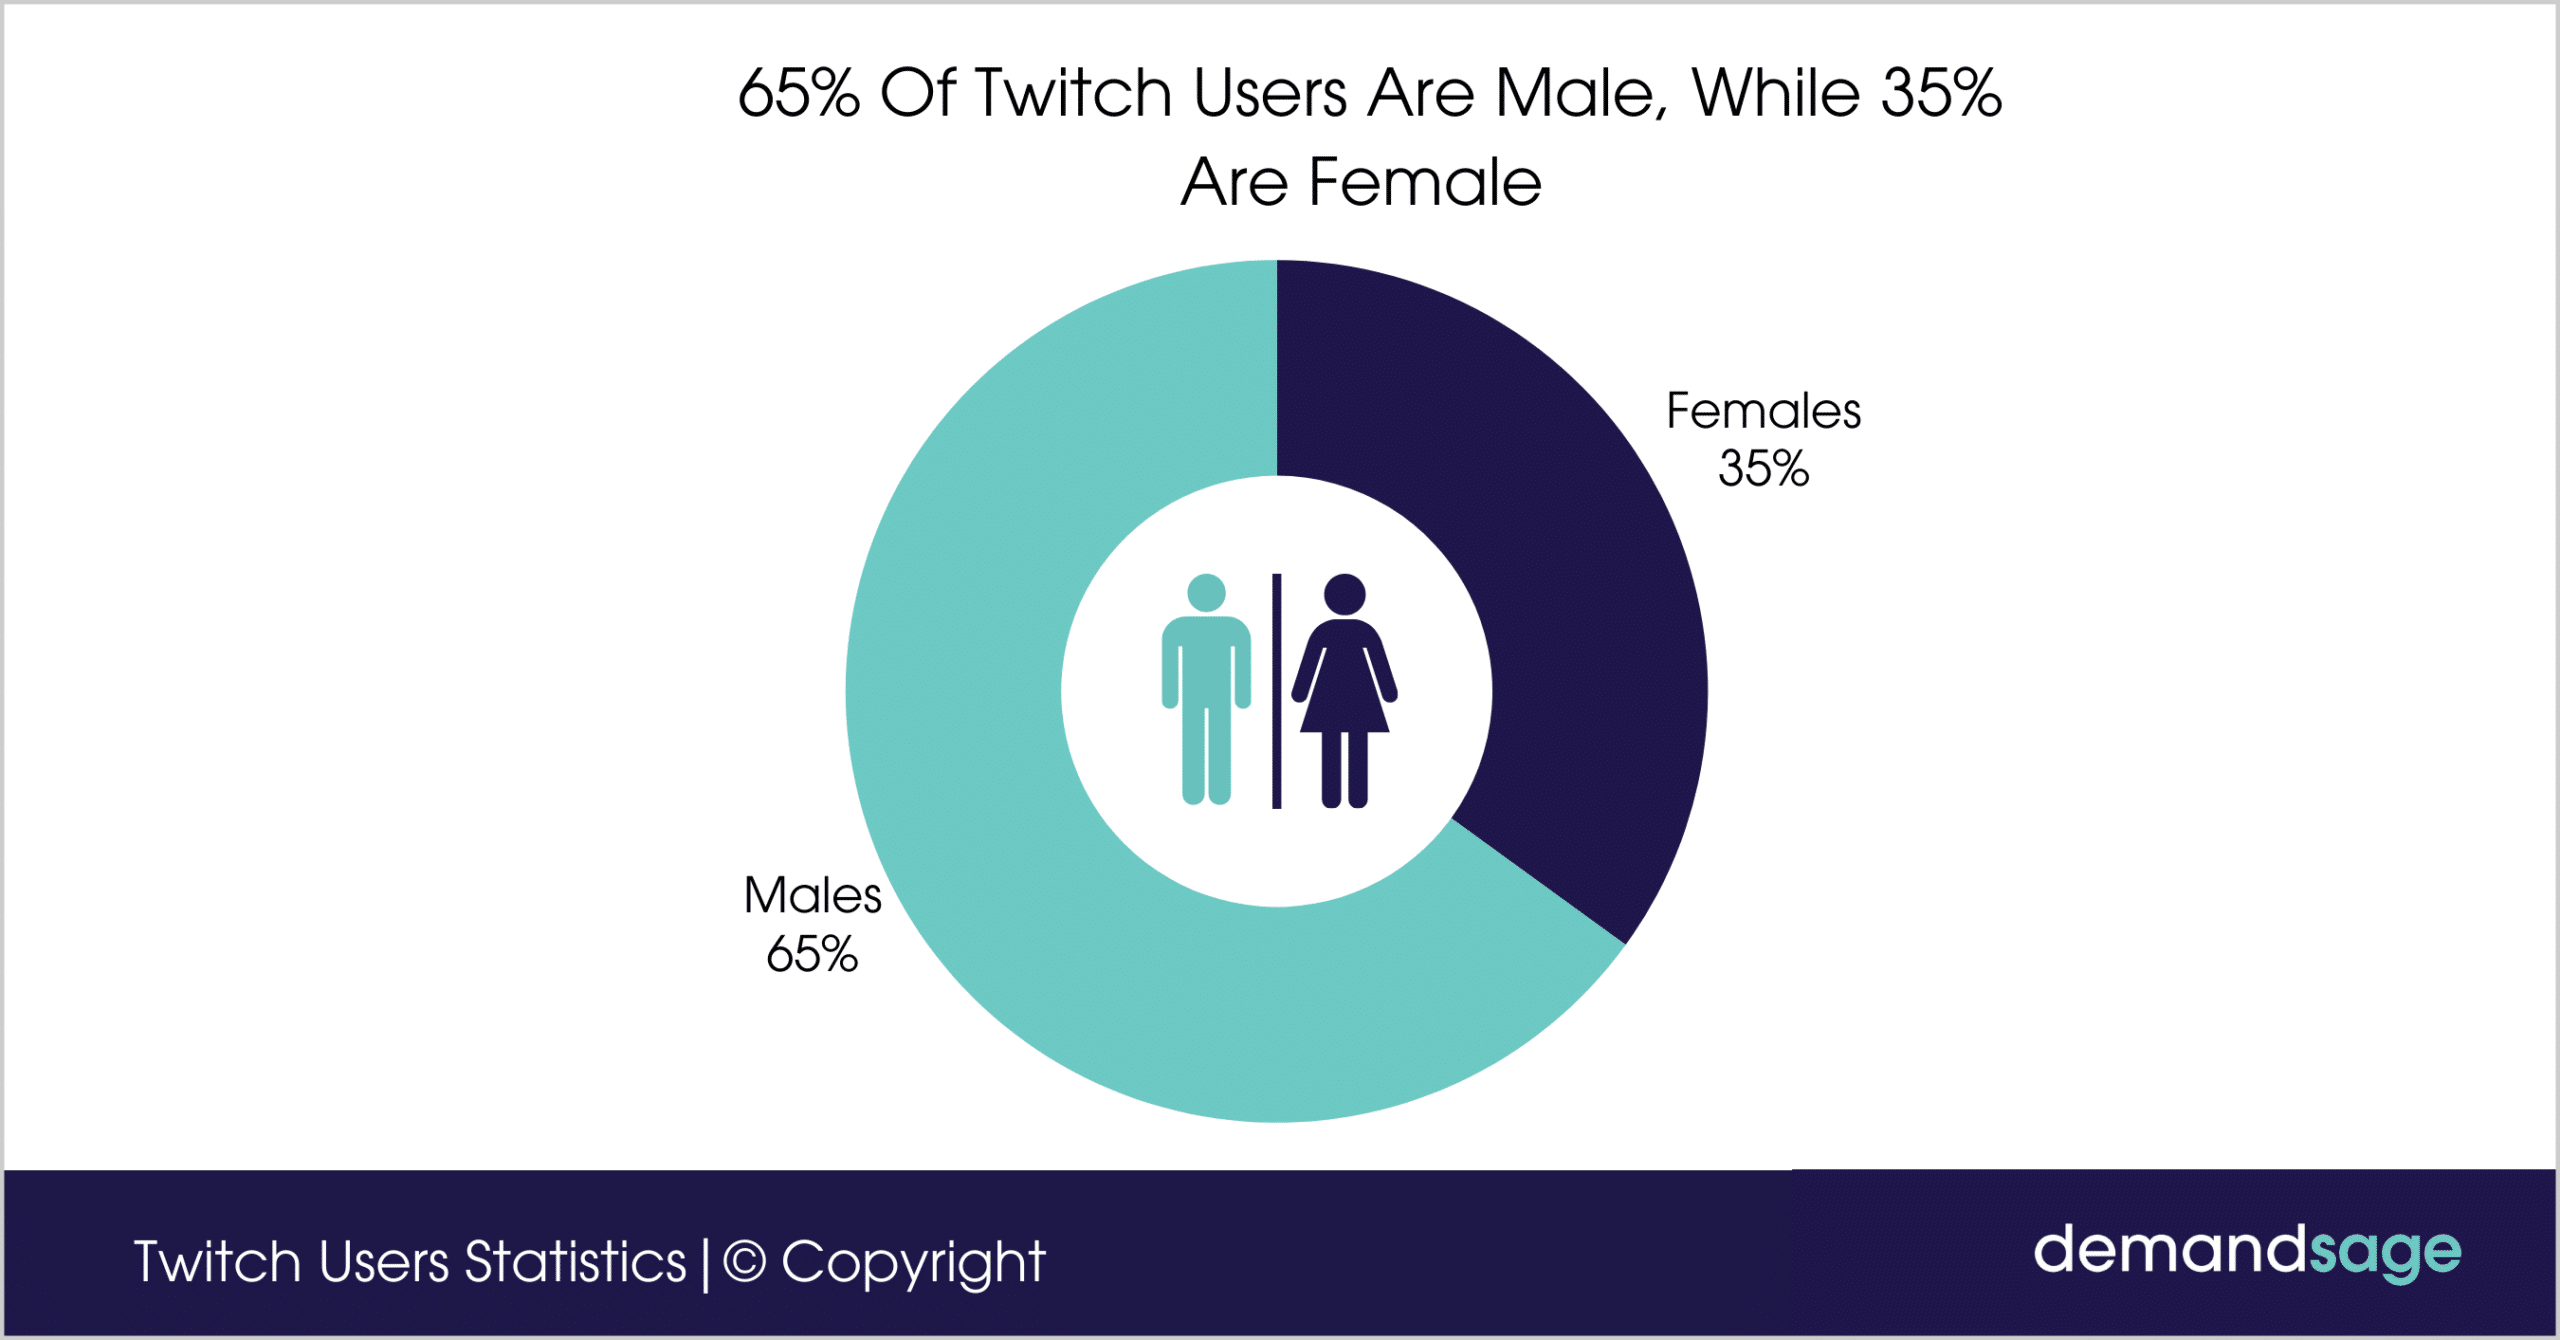 65% Of Twitch Users Are Male, While 35% Are Female